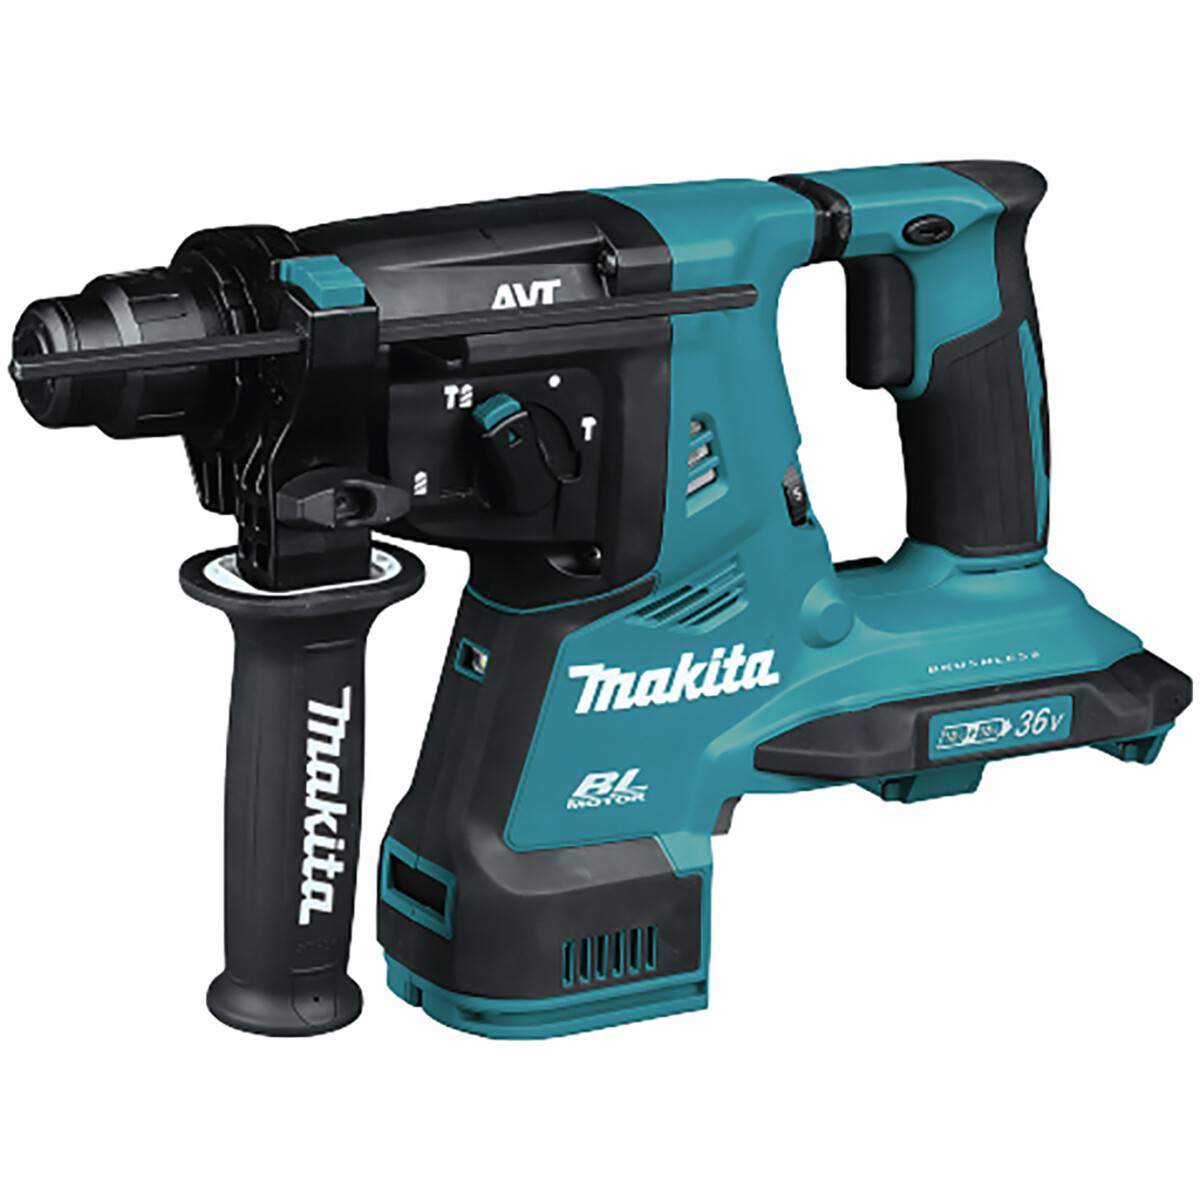 Makita Body DHR280ZWJ 18Vx2 (36V) Brushless SDS+ Rotary Hammer Drill with Unit from Lawson HIS